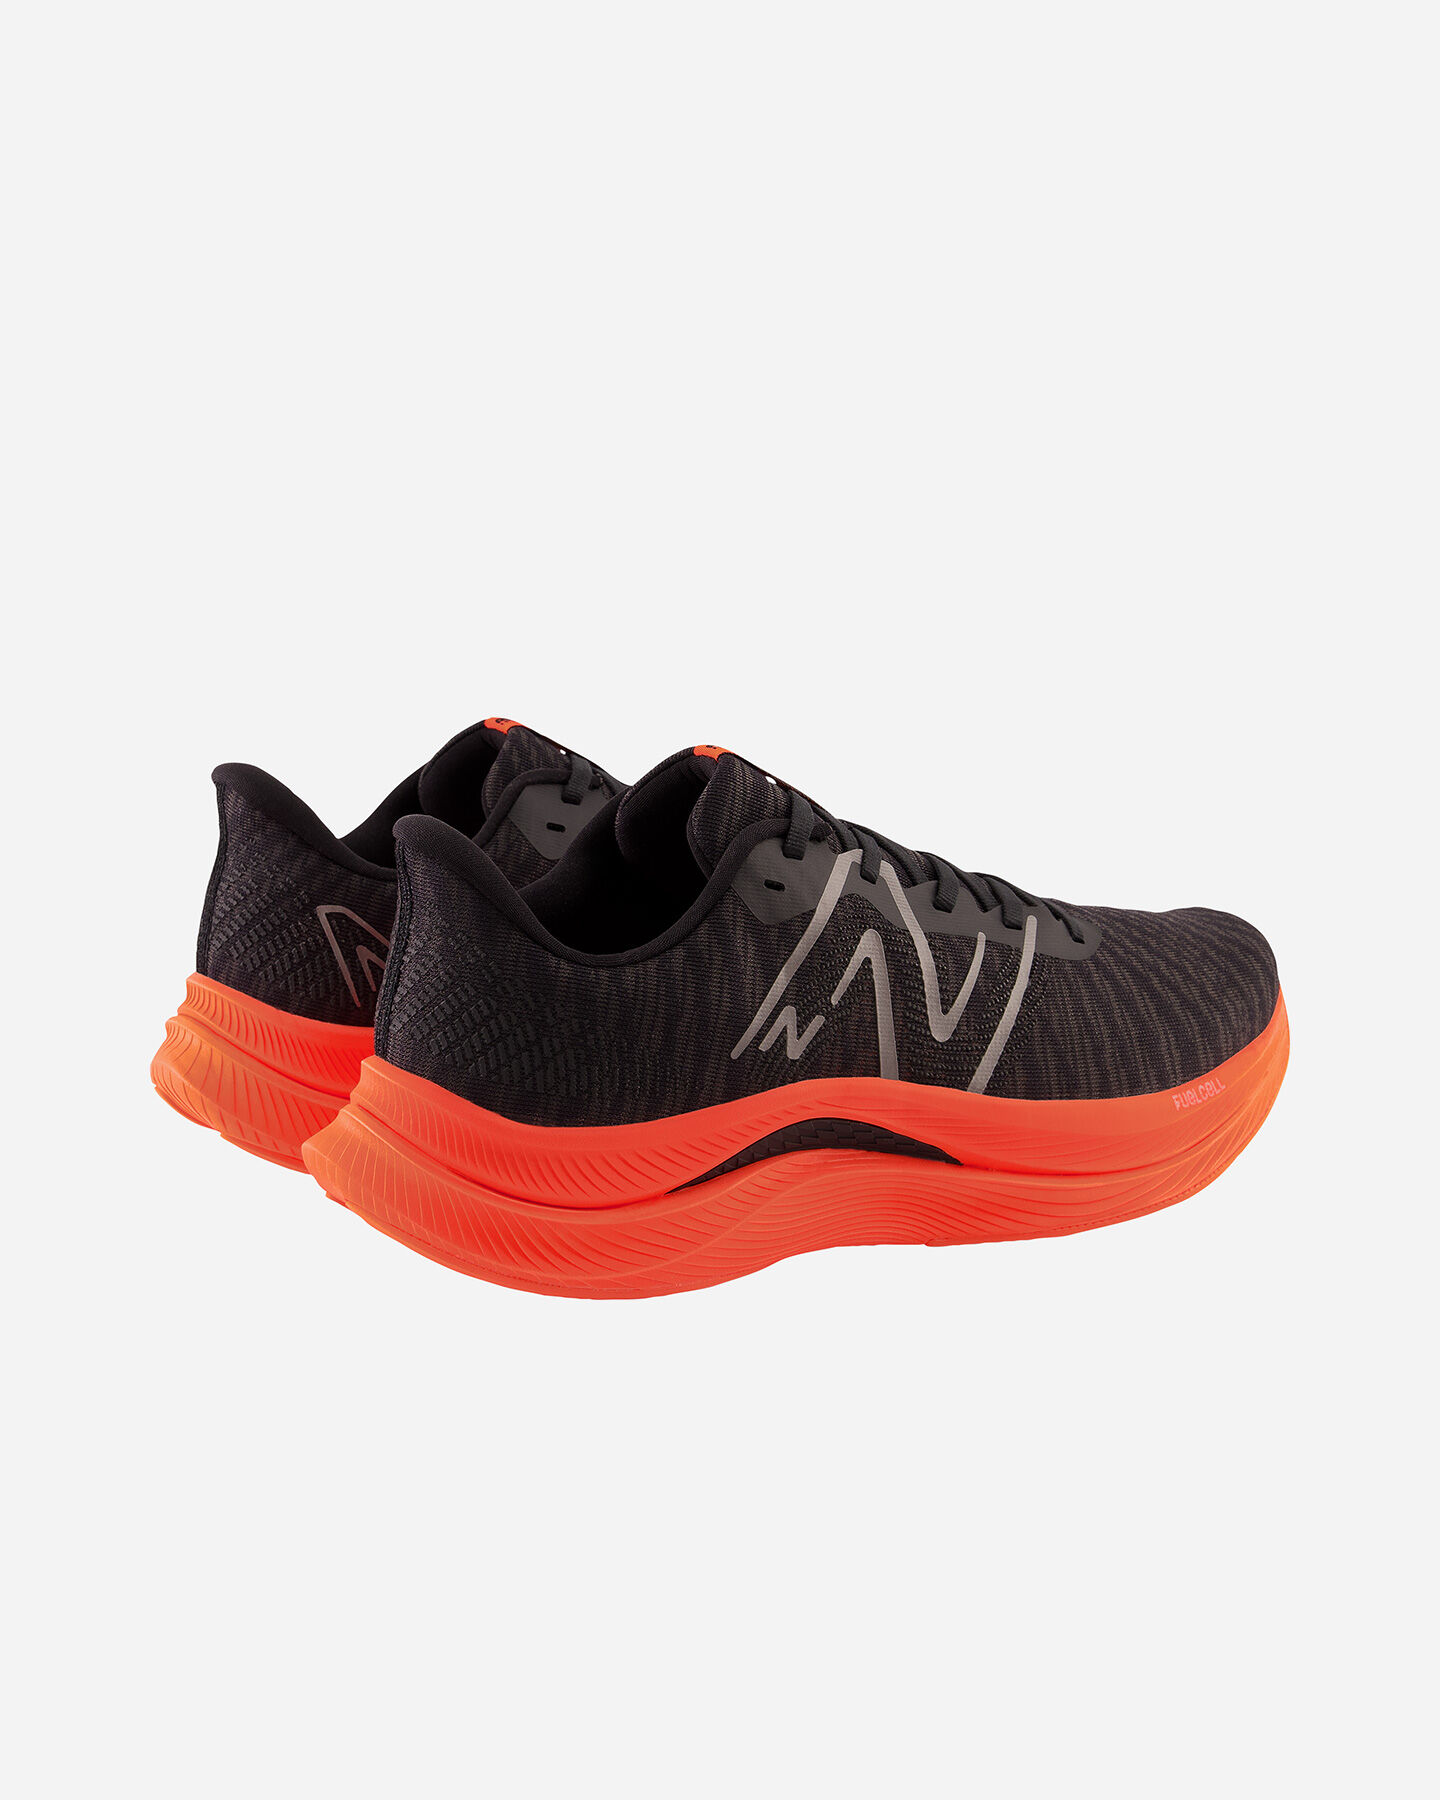  Scarpe running NEW BALANCE FUELCELL PROPEL V4 M S5533321|-|D7 scatto 2